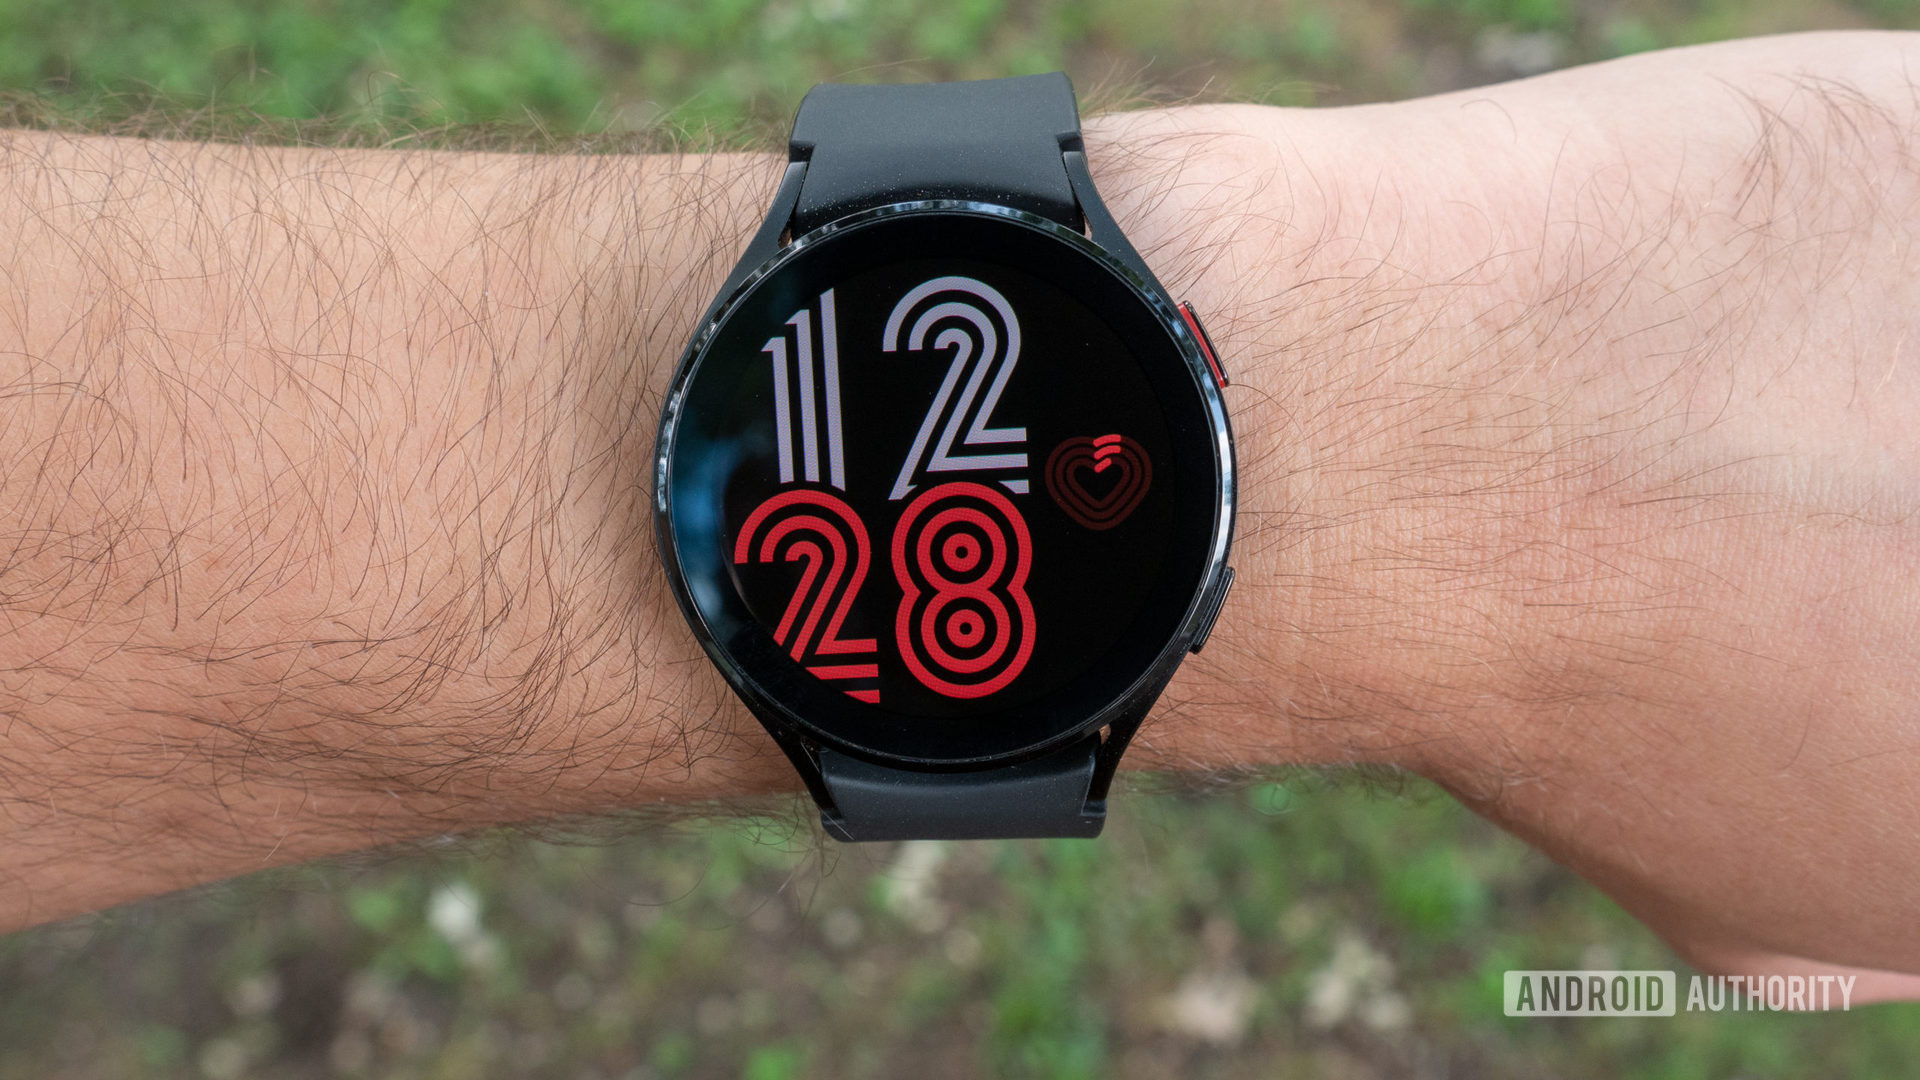 The Samsung Galaxy Watch 4 on a wrist showing the watch face.